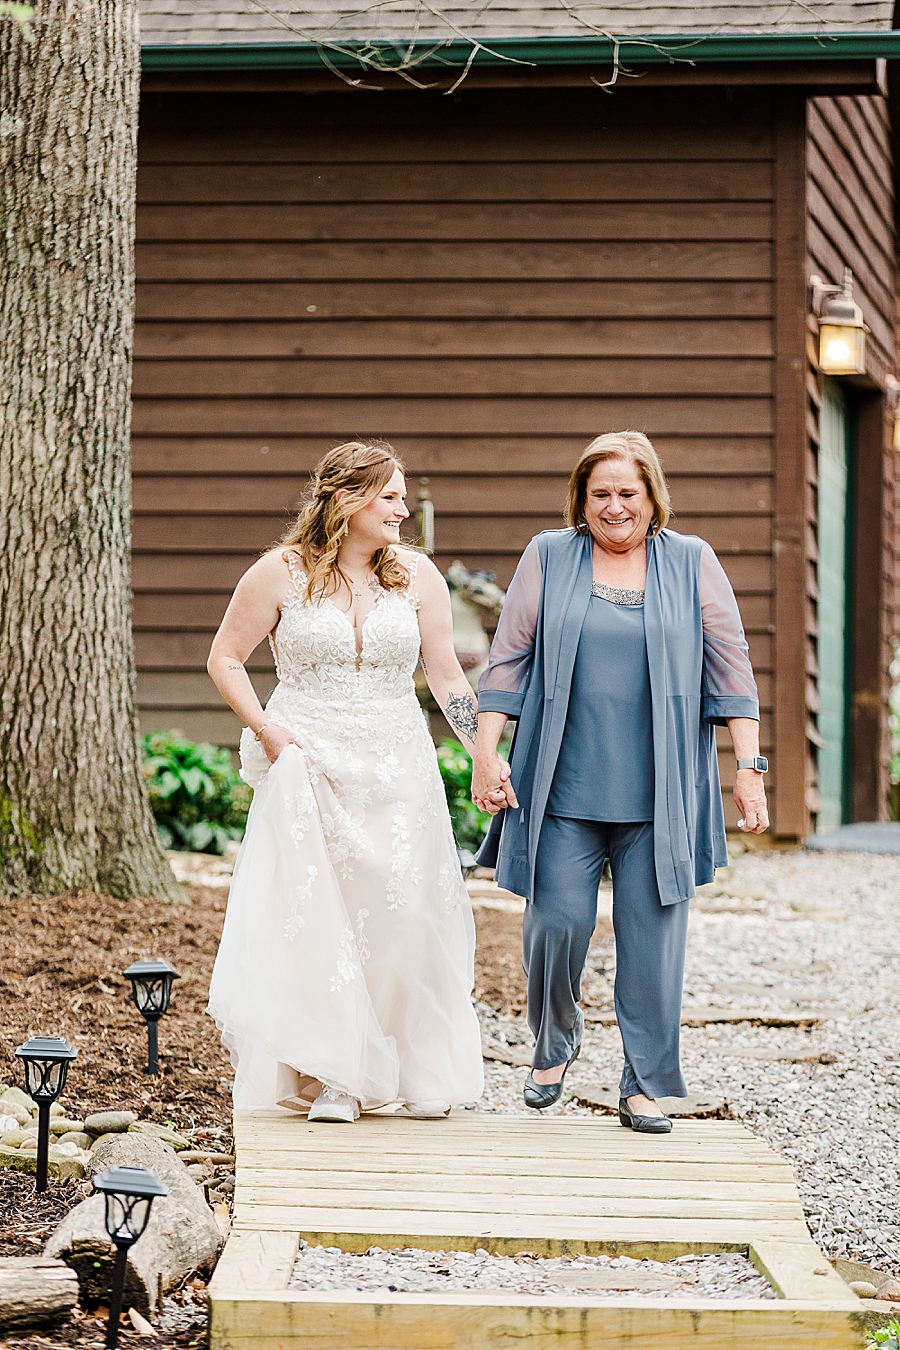 mother walking daughter down aisle